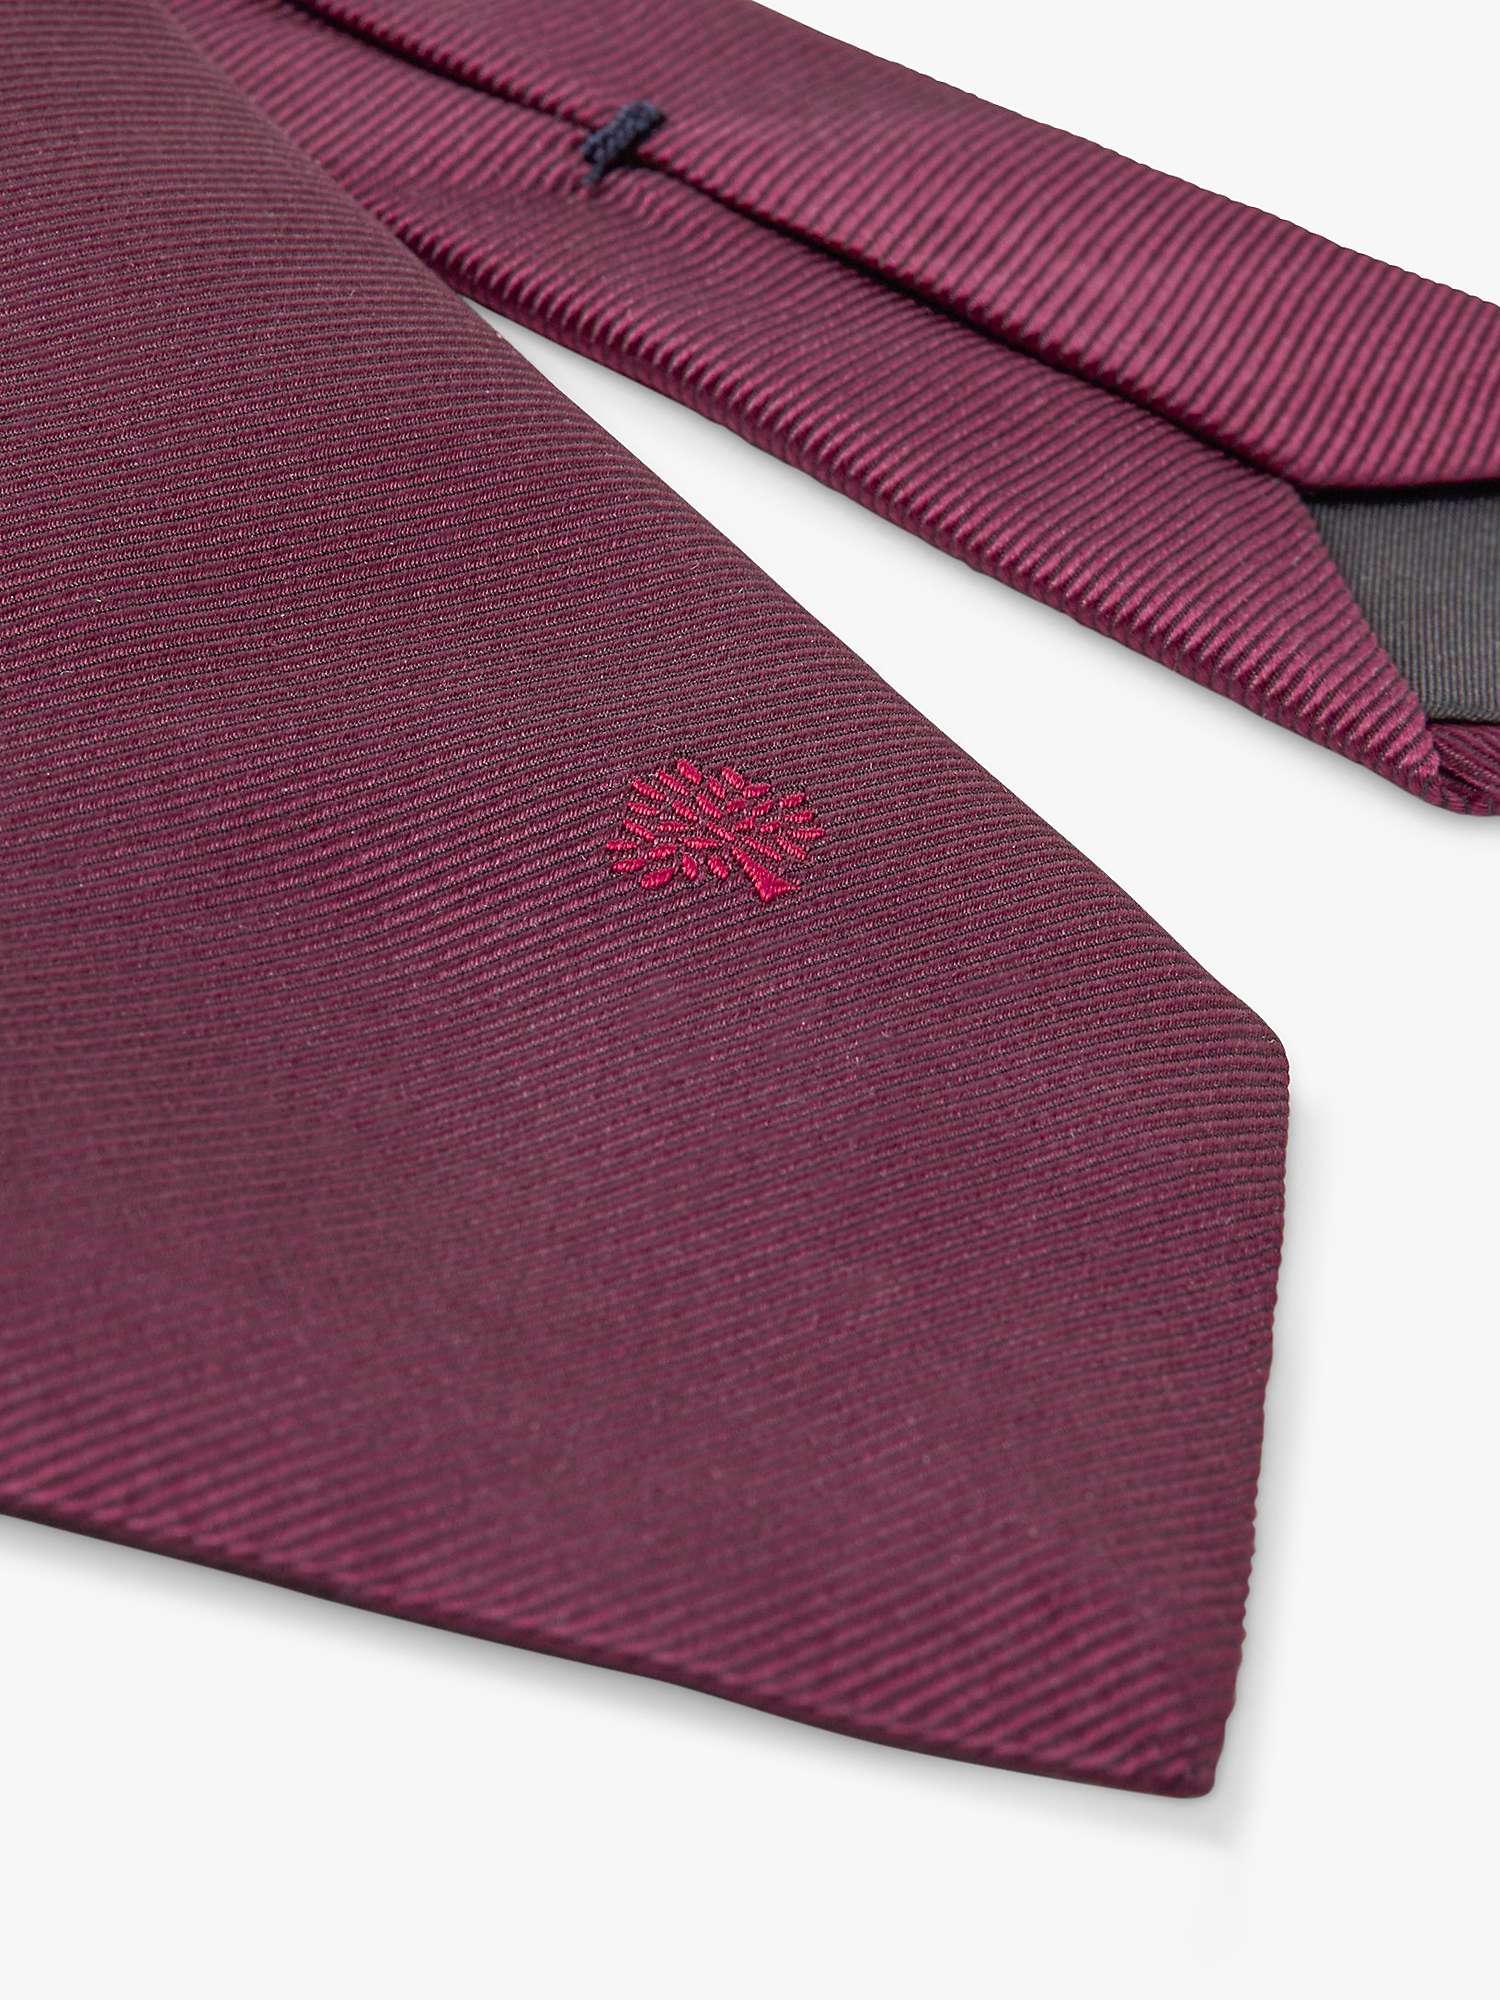 Buy Mulberry Embroidered Mulberry Tree Textured Silk Tie Online at johnlewis.com